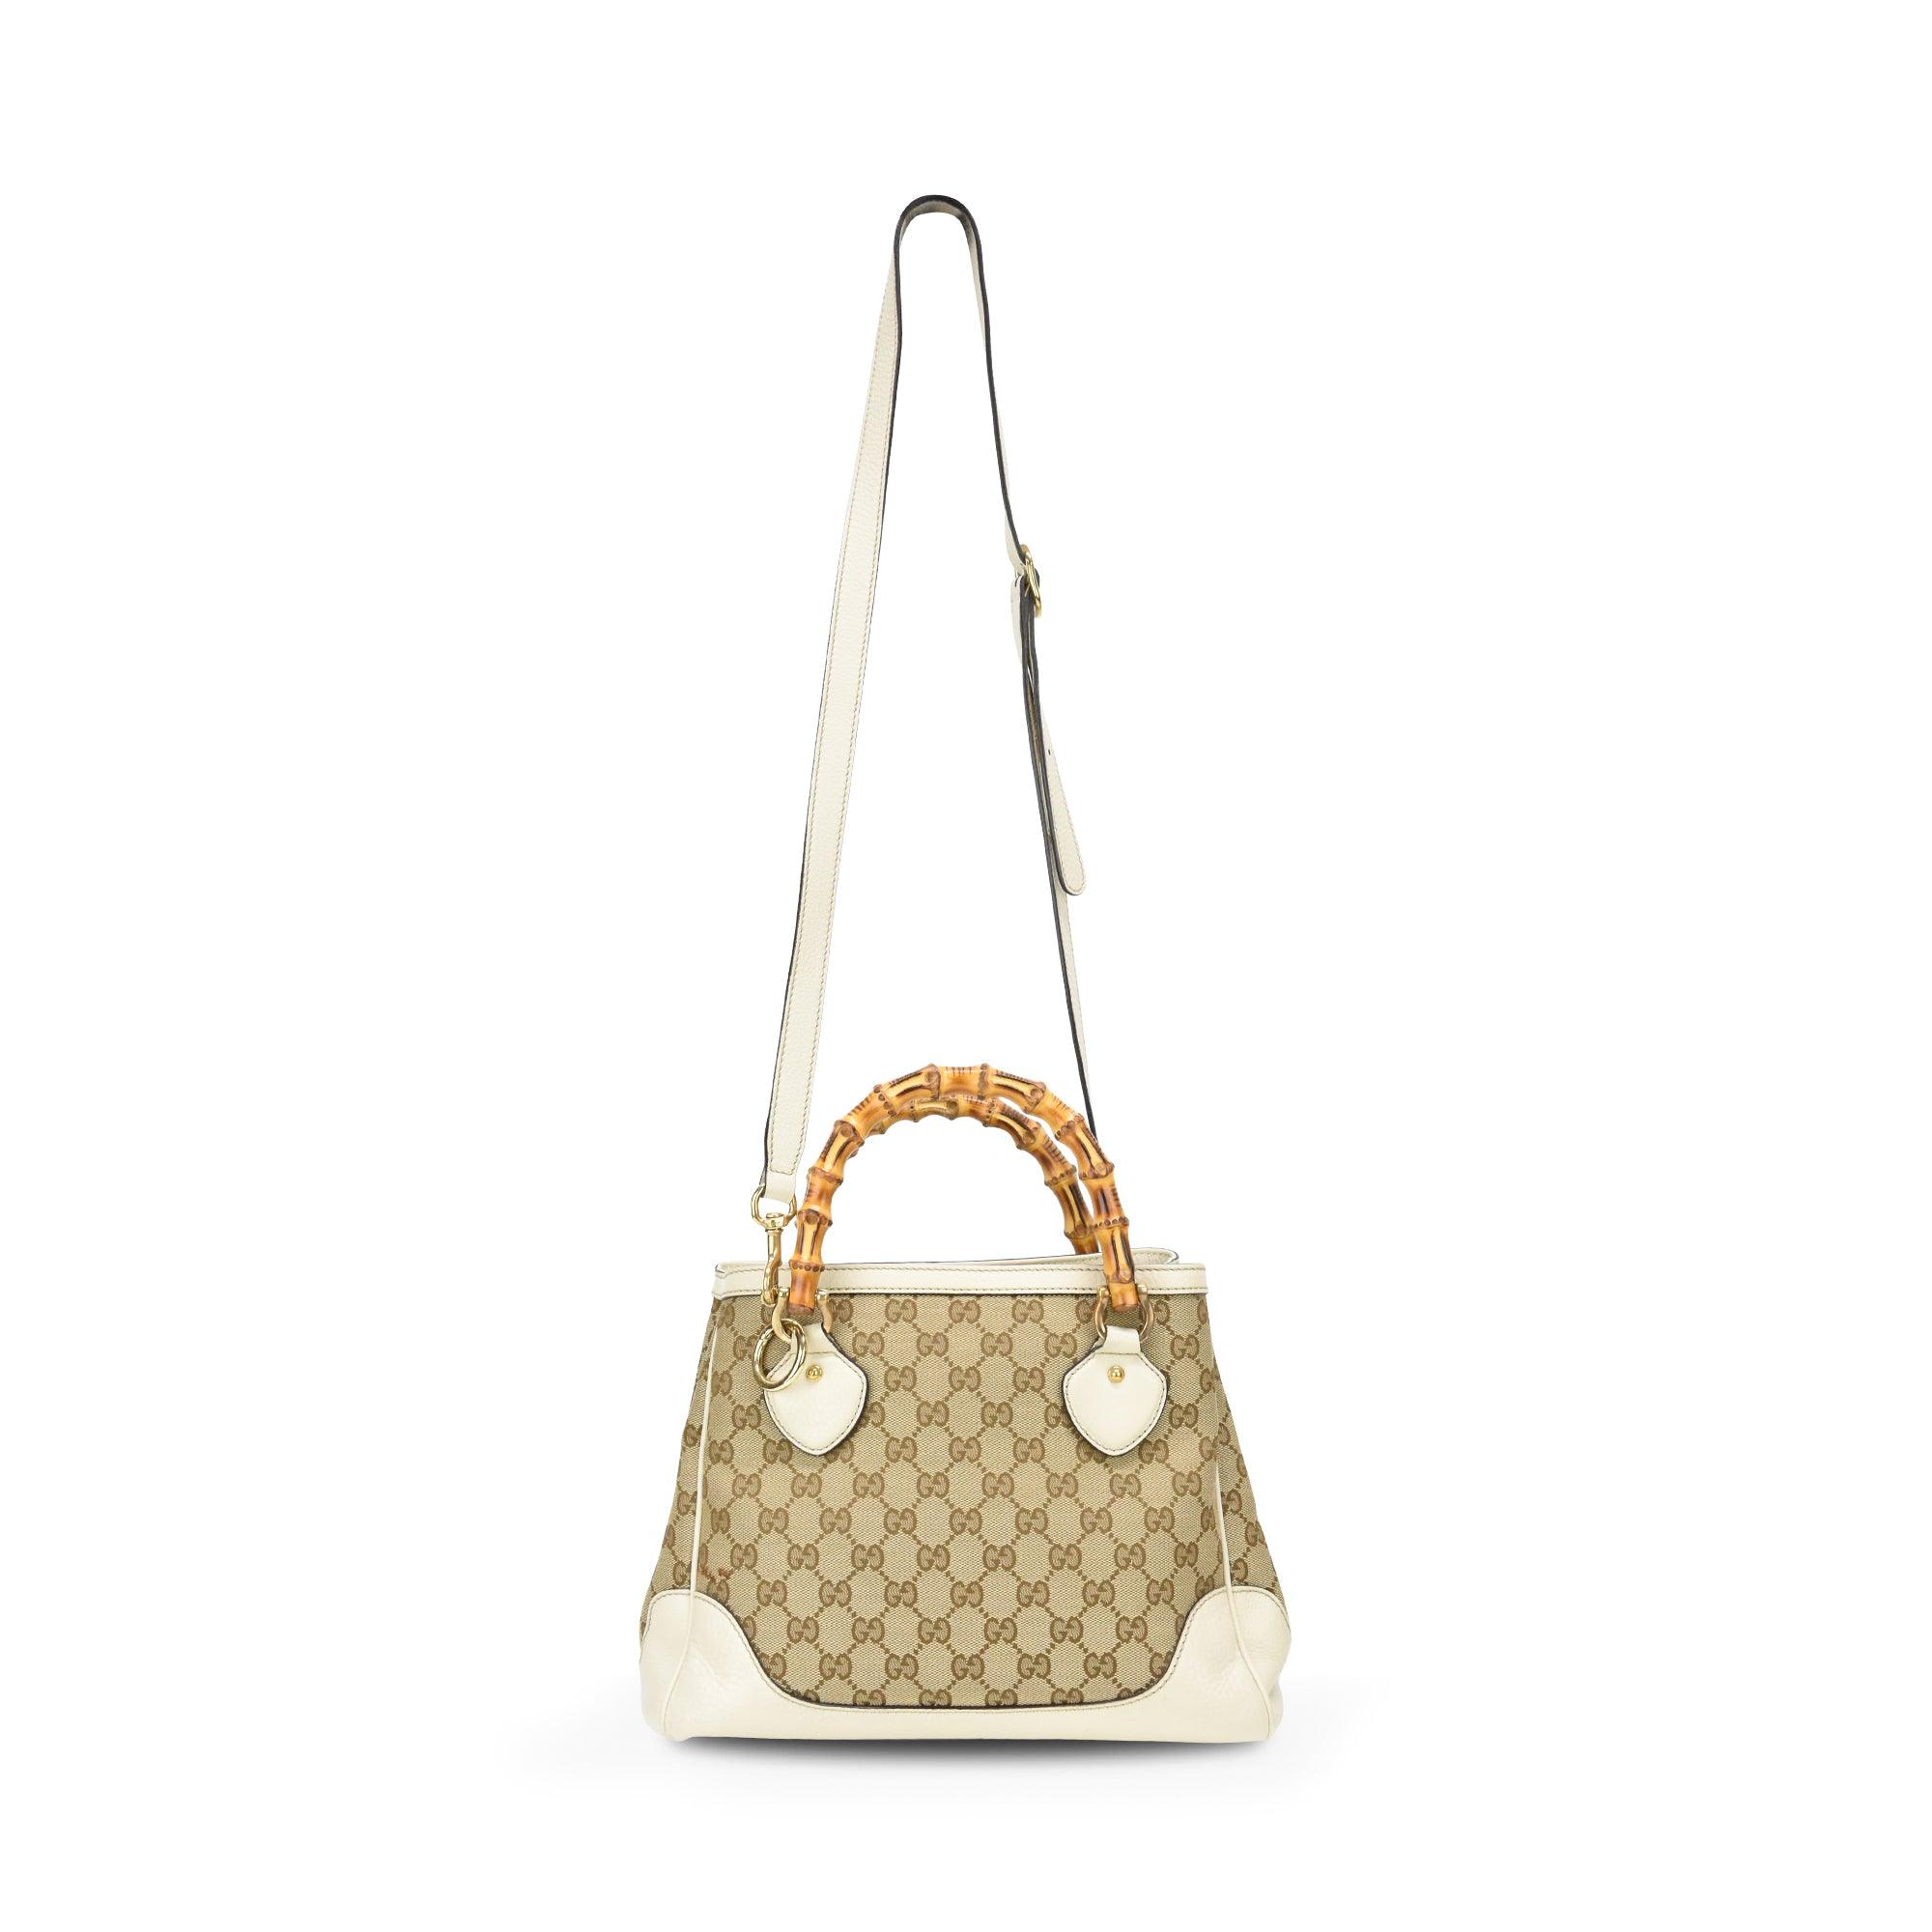 Gucci 'Diana' Bag - Fashionably Yours